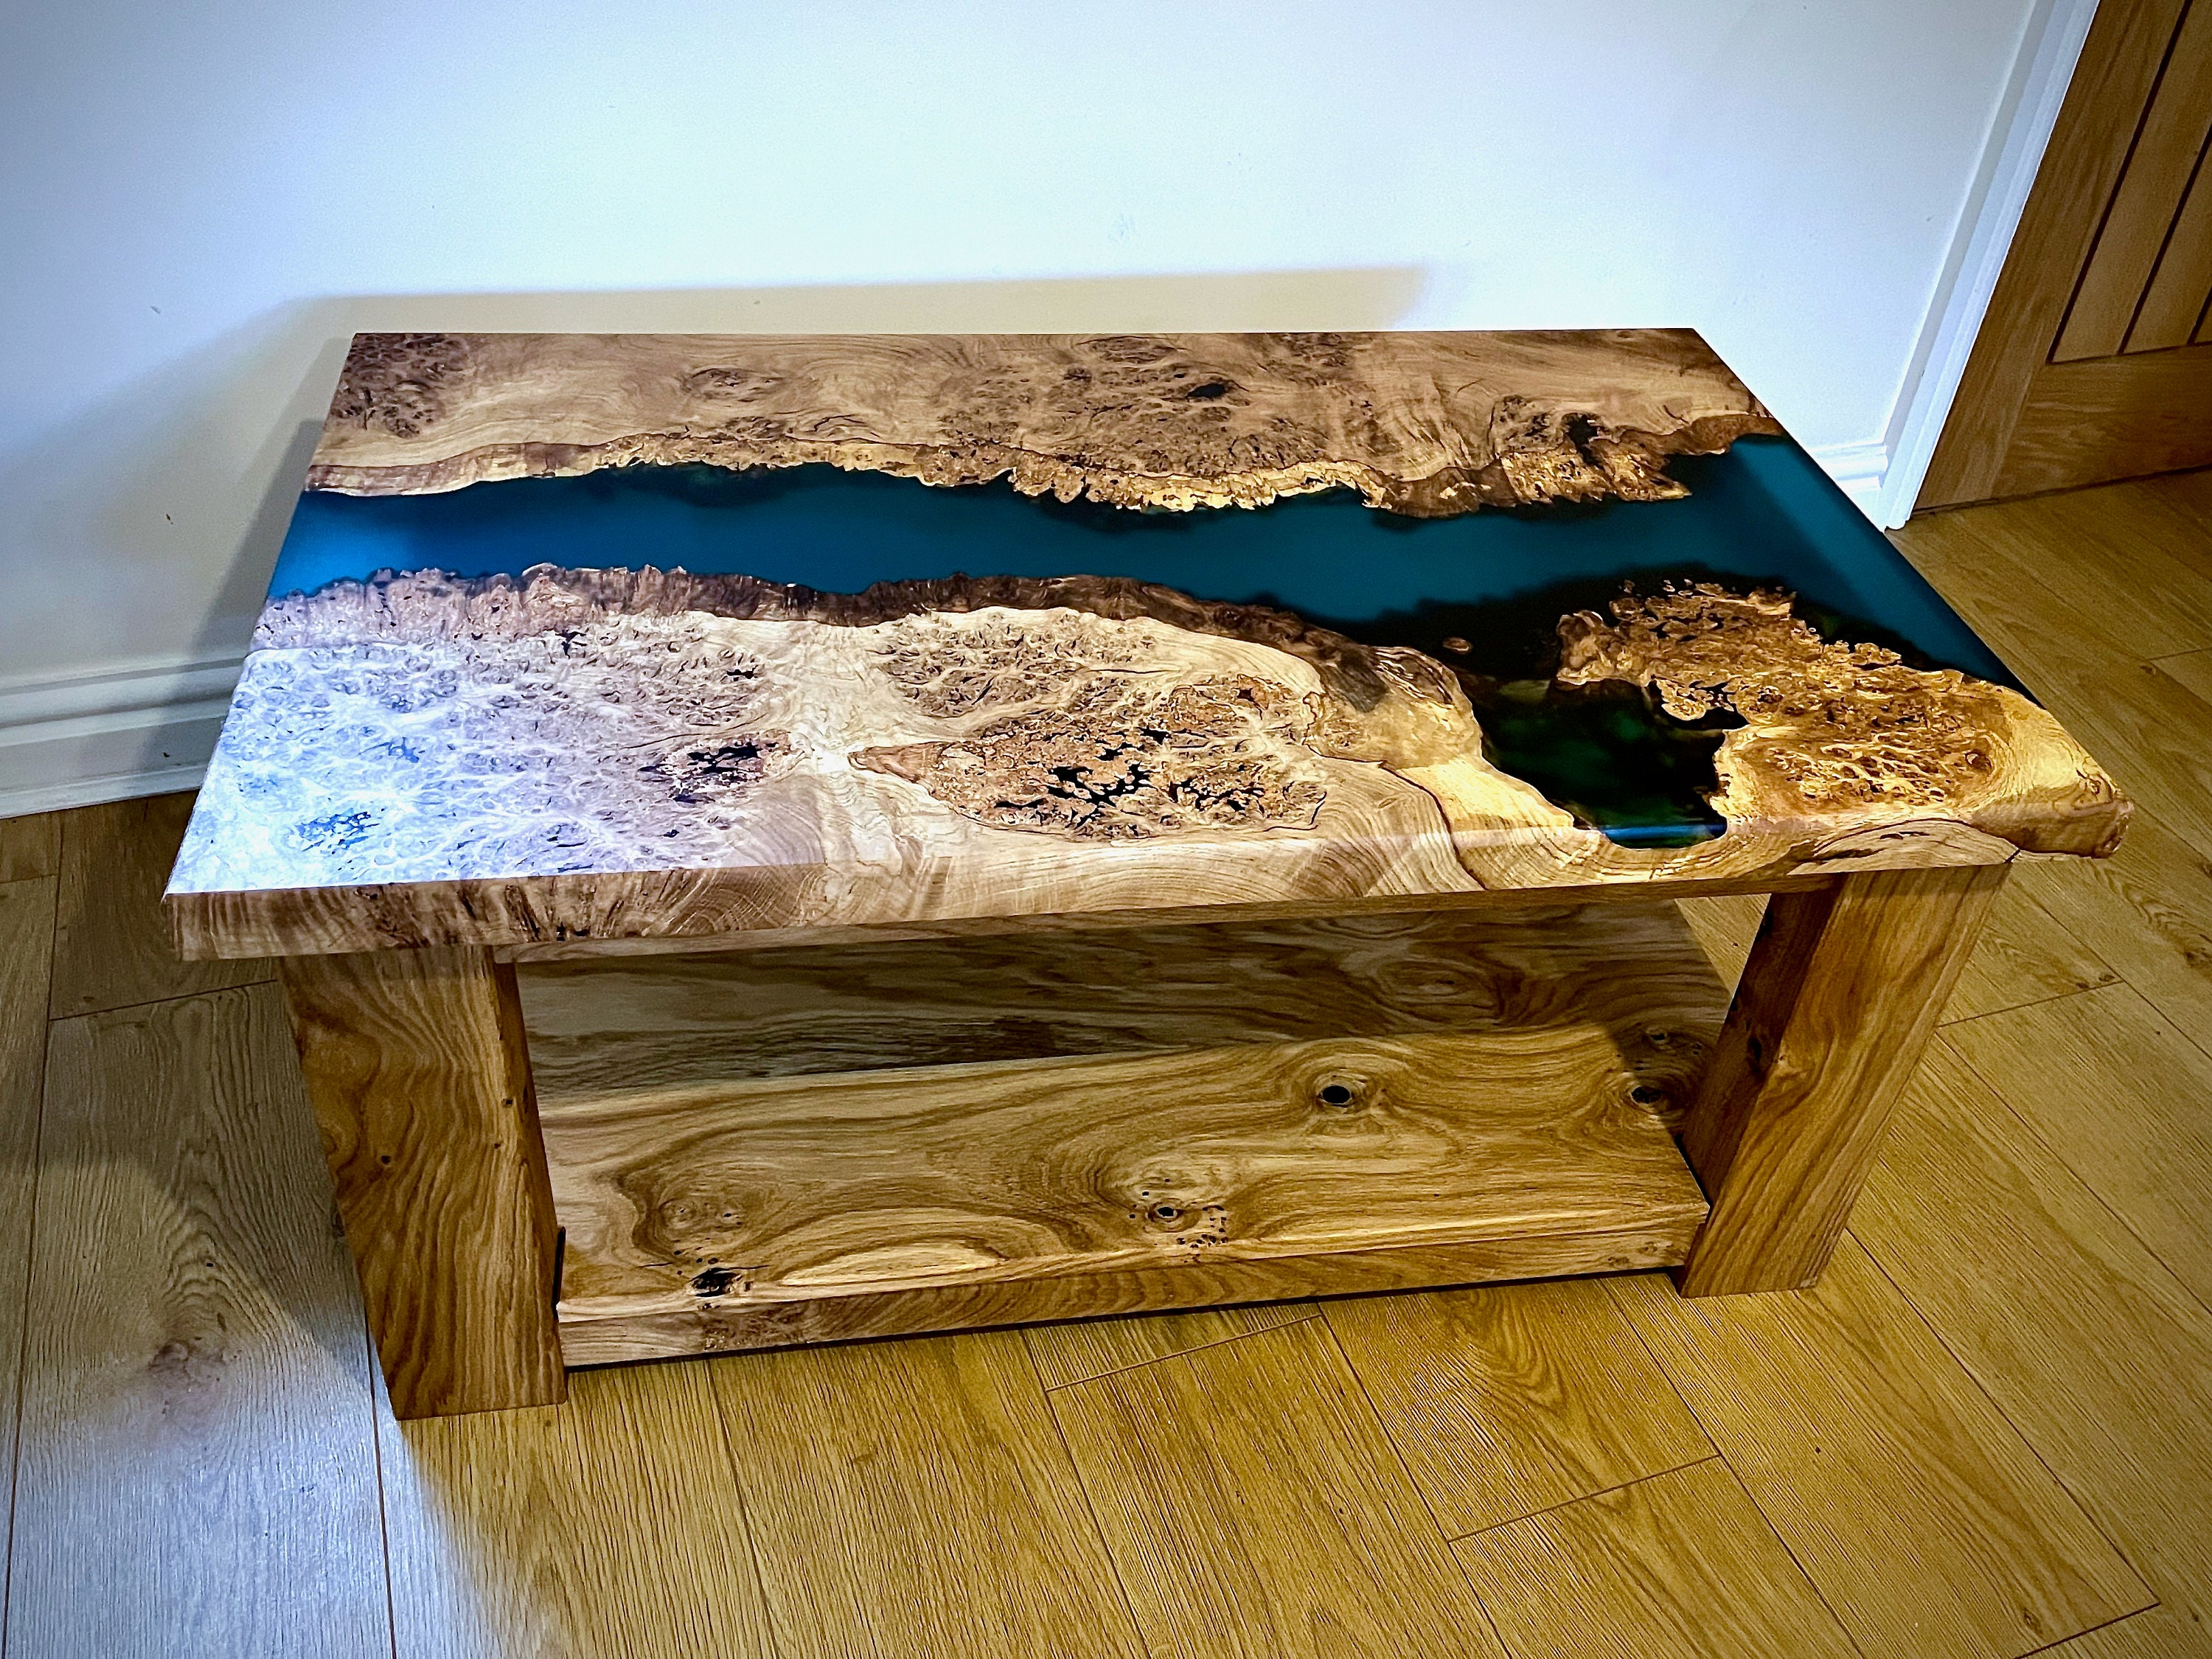 Pour Your Own Epoxy™ Coffee Table – Midwest Woodturners